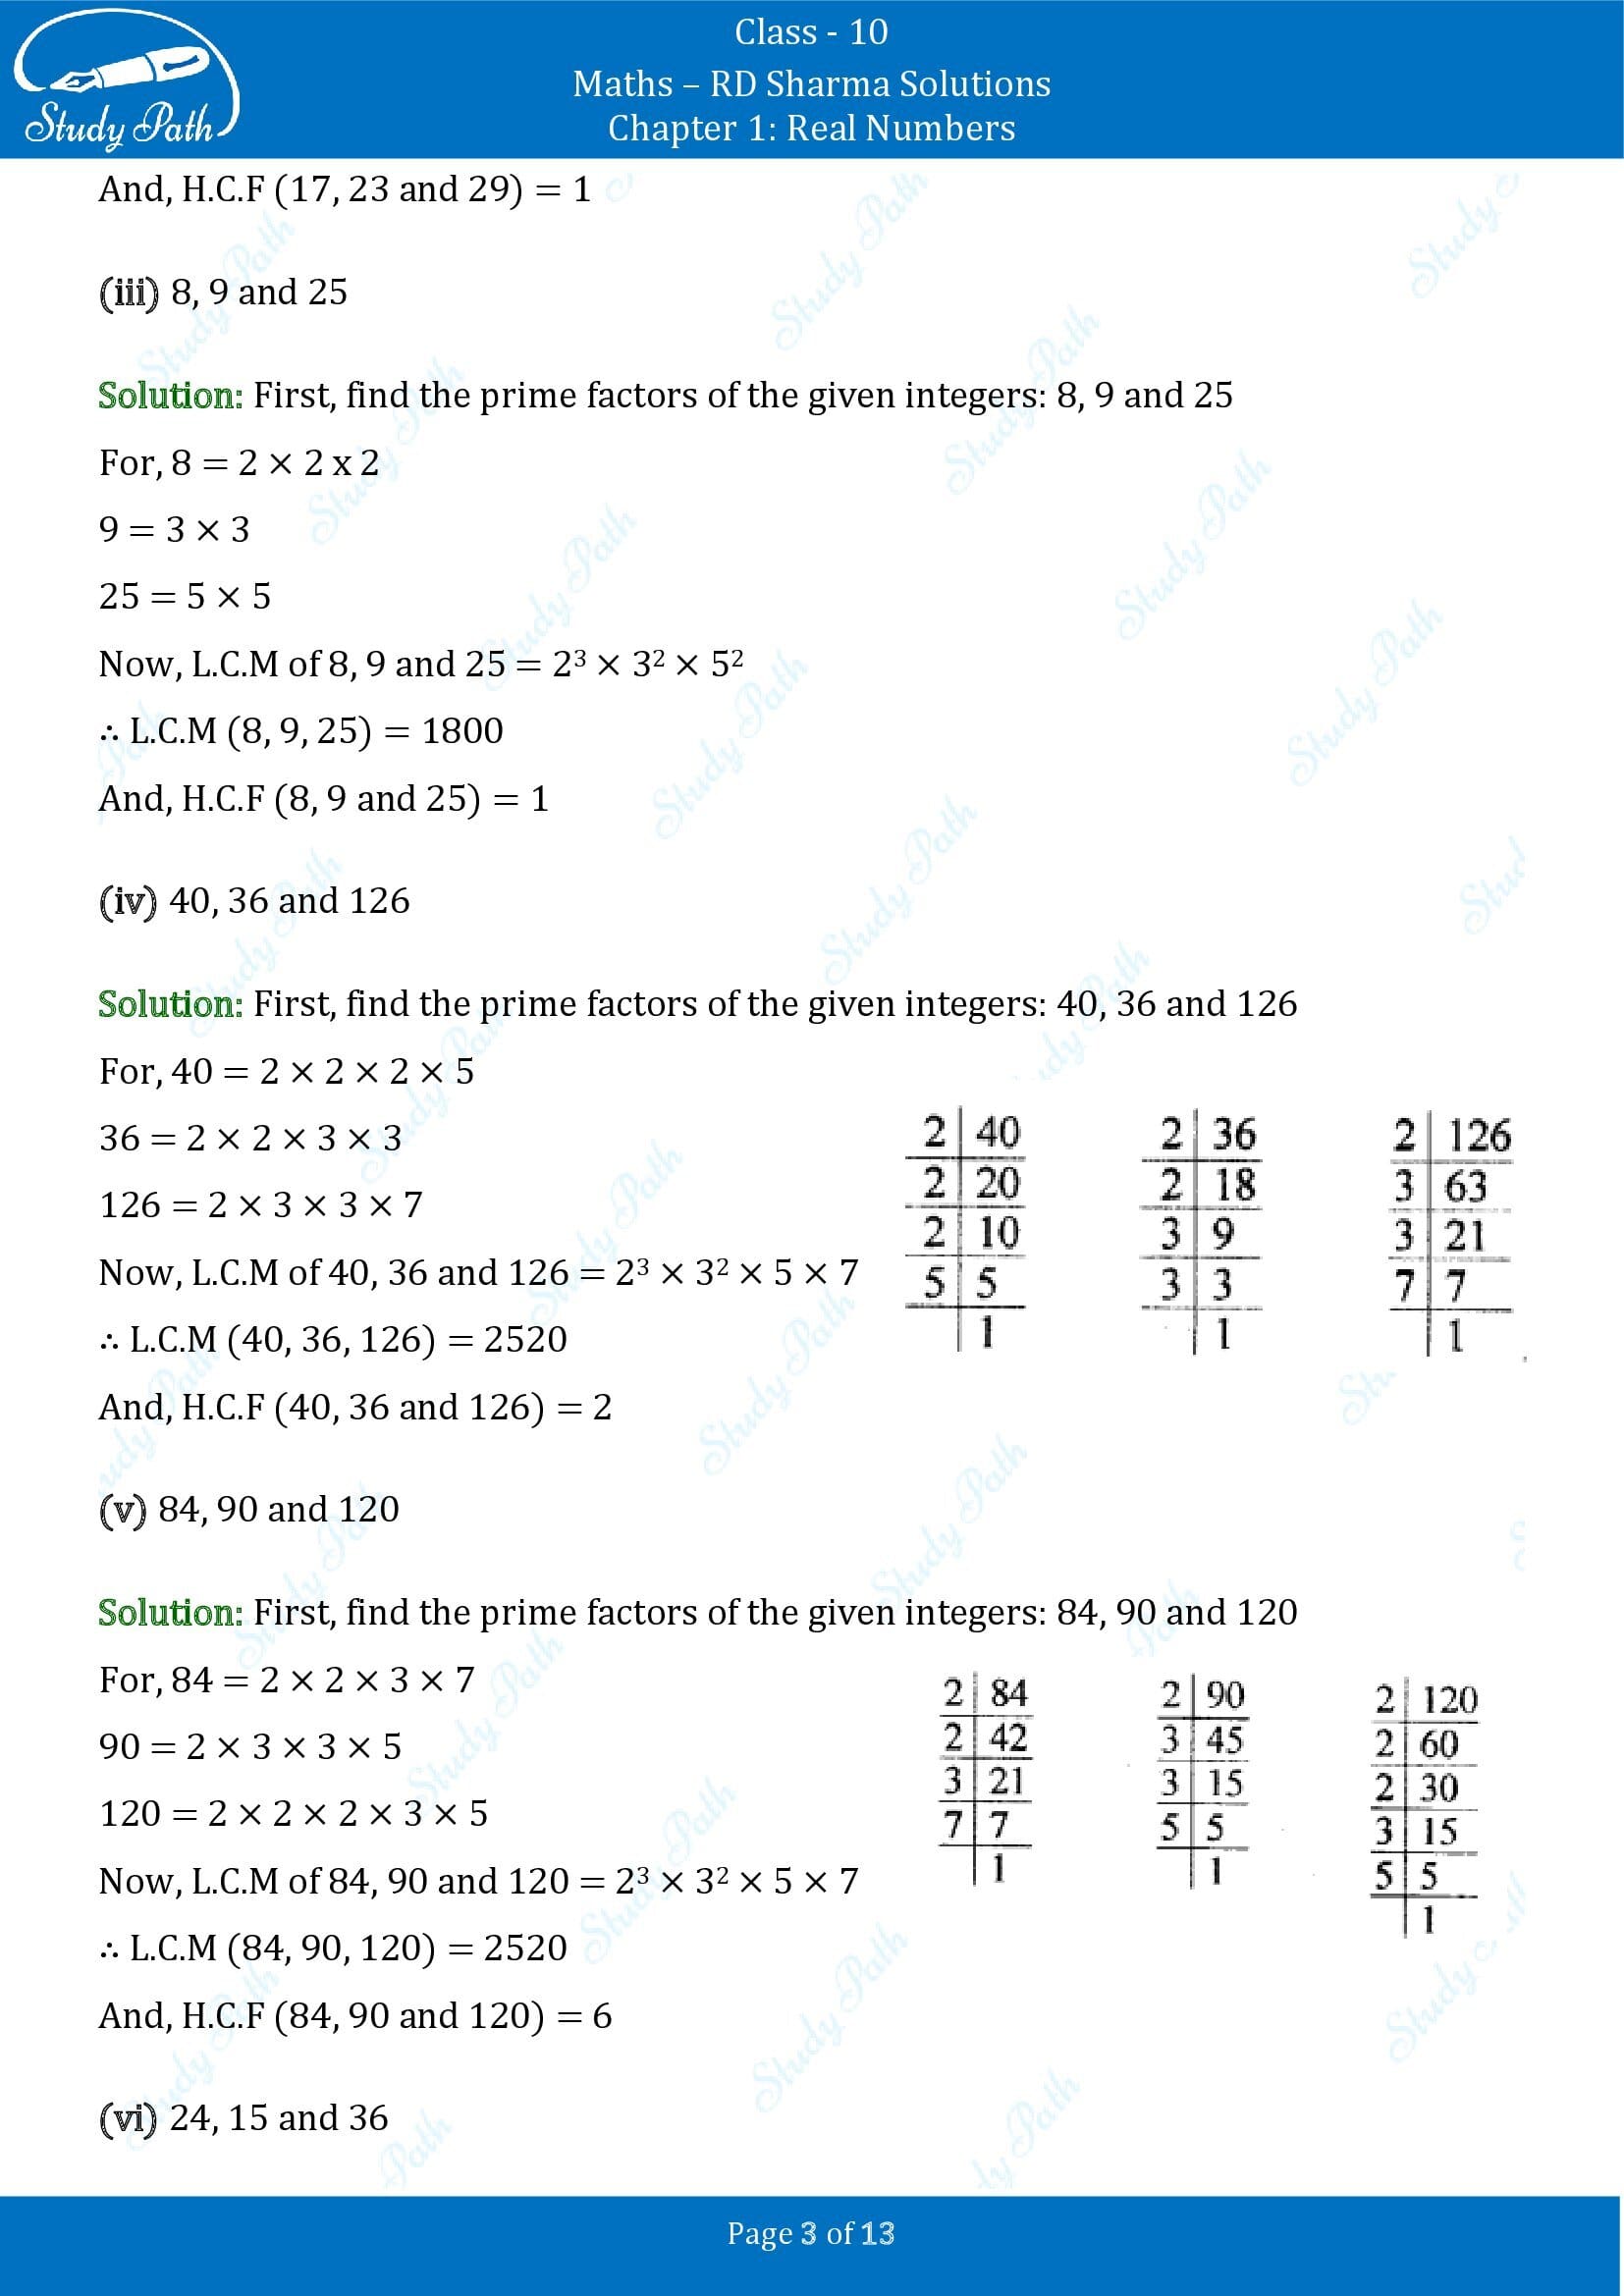 RD Sharma Solutions Class 10 Chapter 1 Real Numbers Exercise 1.4 00003